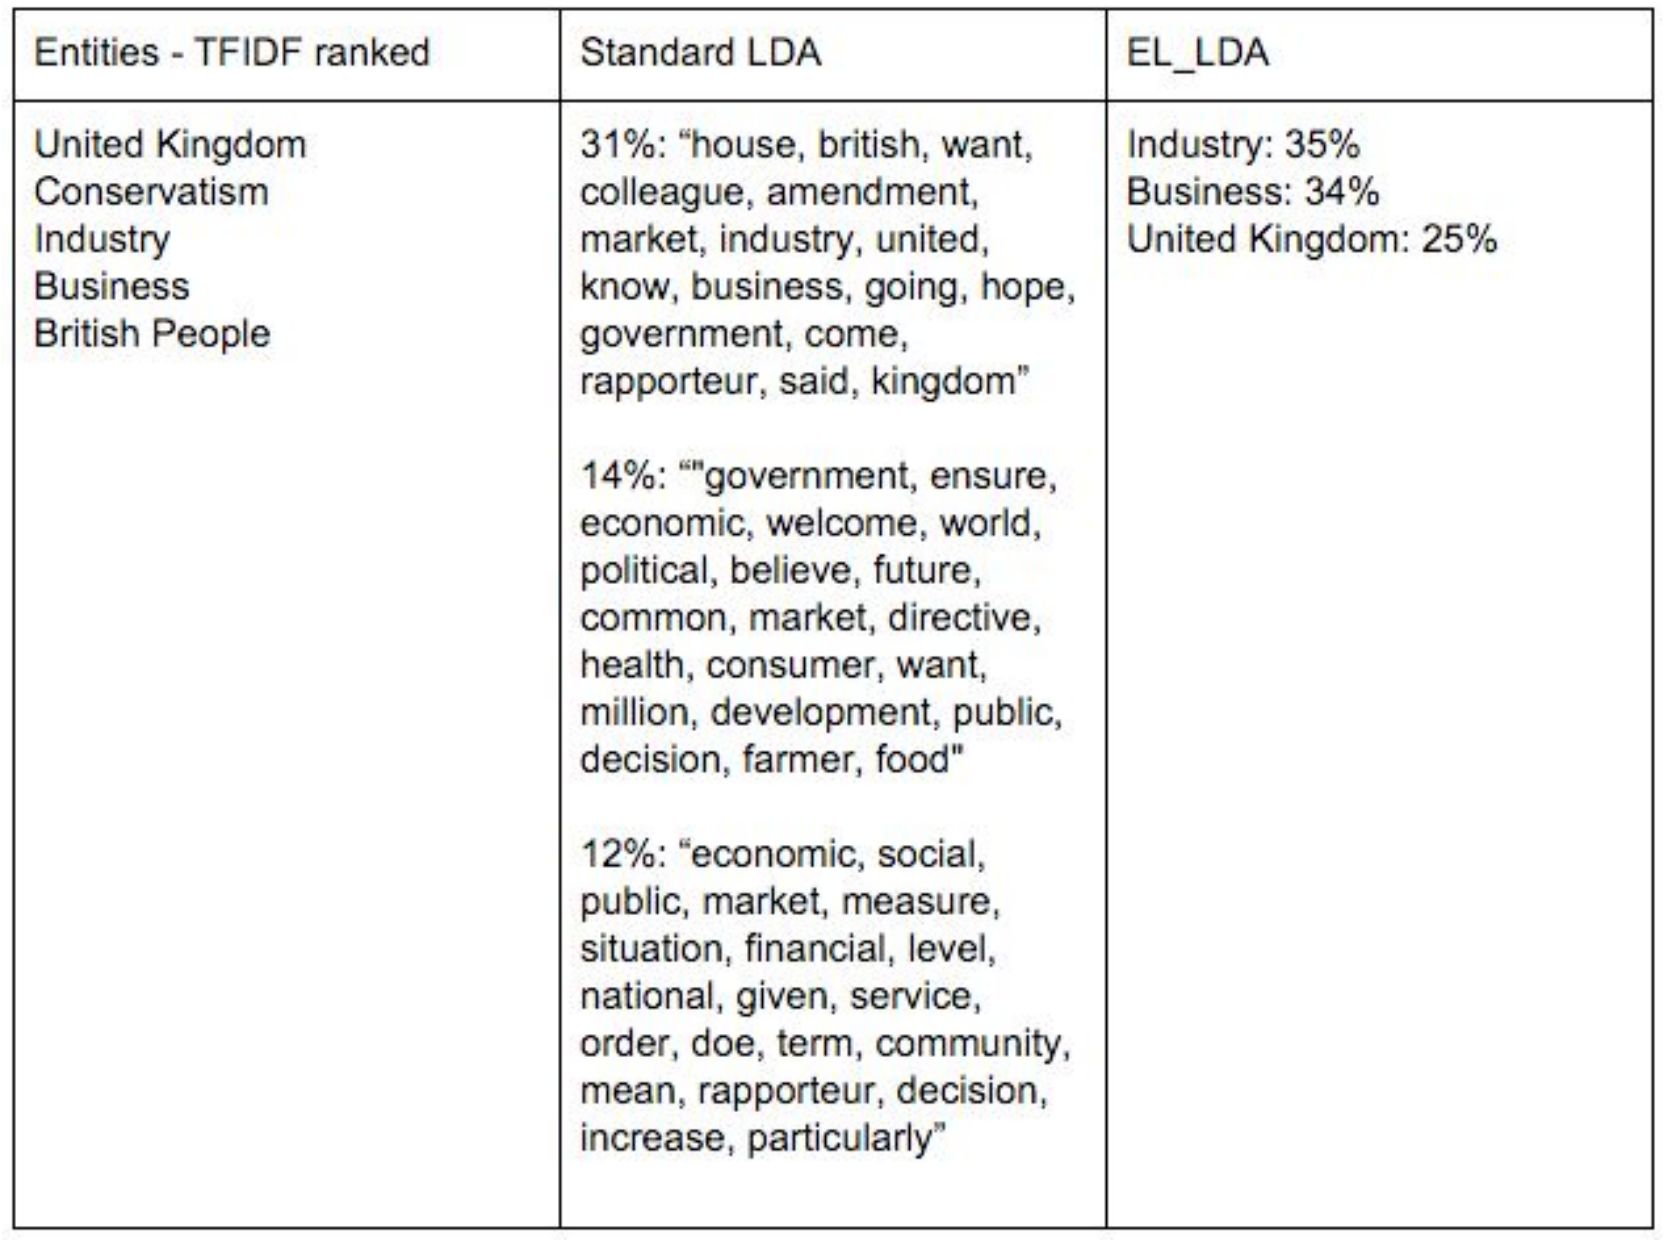 Figure: Linked entities (tf-idf-ranked), standard LDA topics and EL-LDA topics for speeches by the Conservative Party (UK).